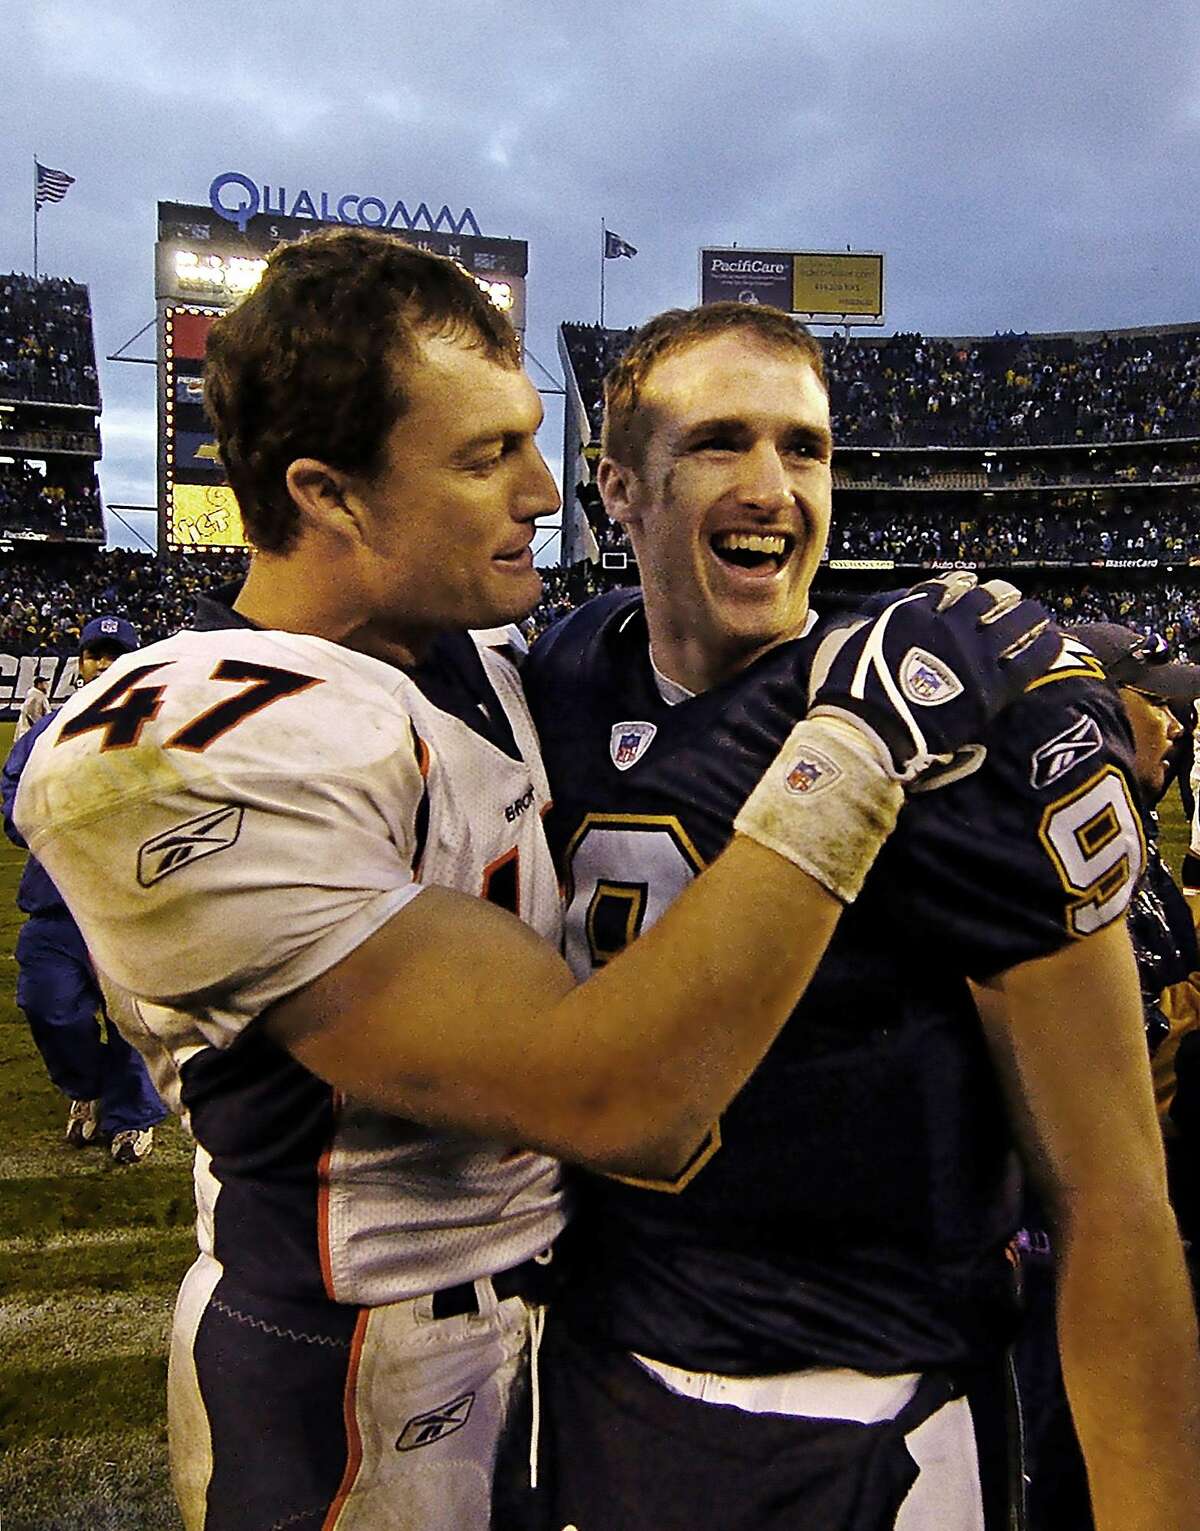 San Diego Chargers quarterback Drew Brees, right, is hugged by Denver Broncos John Lynch after the Chargers 20-17 victory Sunday Dec. 5, 2004 in San Diego. (AP Photo/Denis Poroy) HOUCHRON CAPTION (12/23/2004) SECSPTS: BREES.